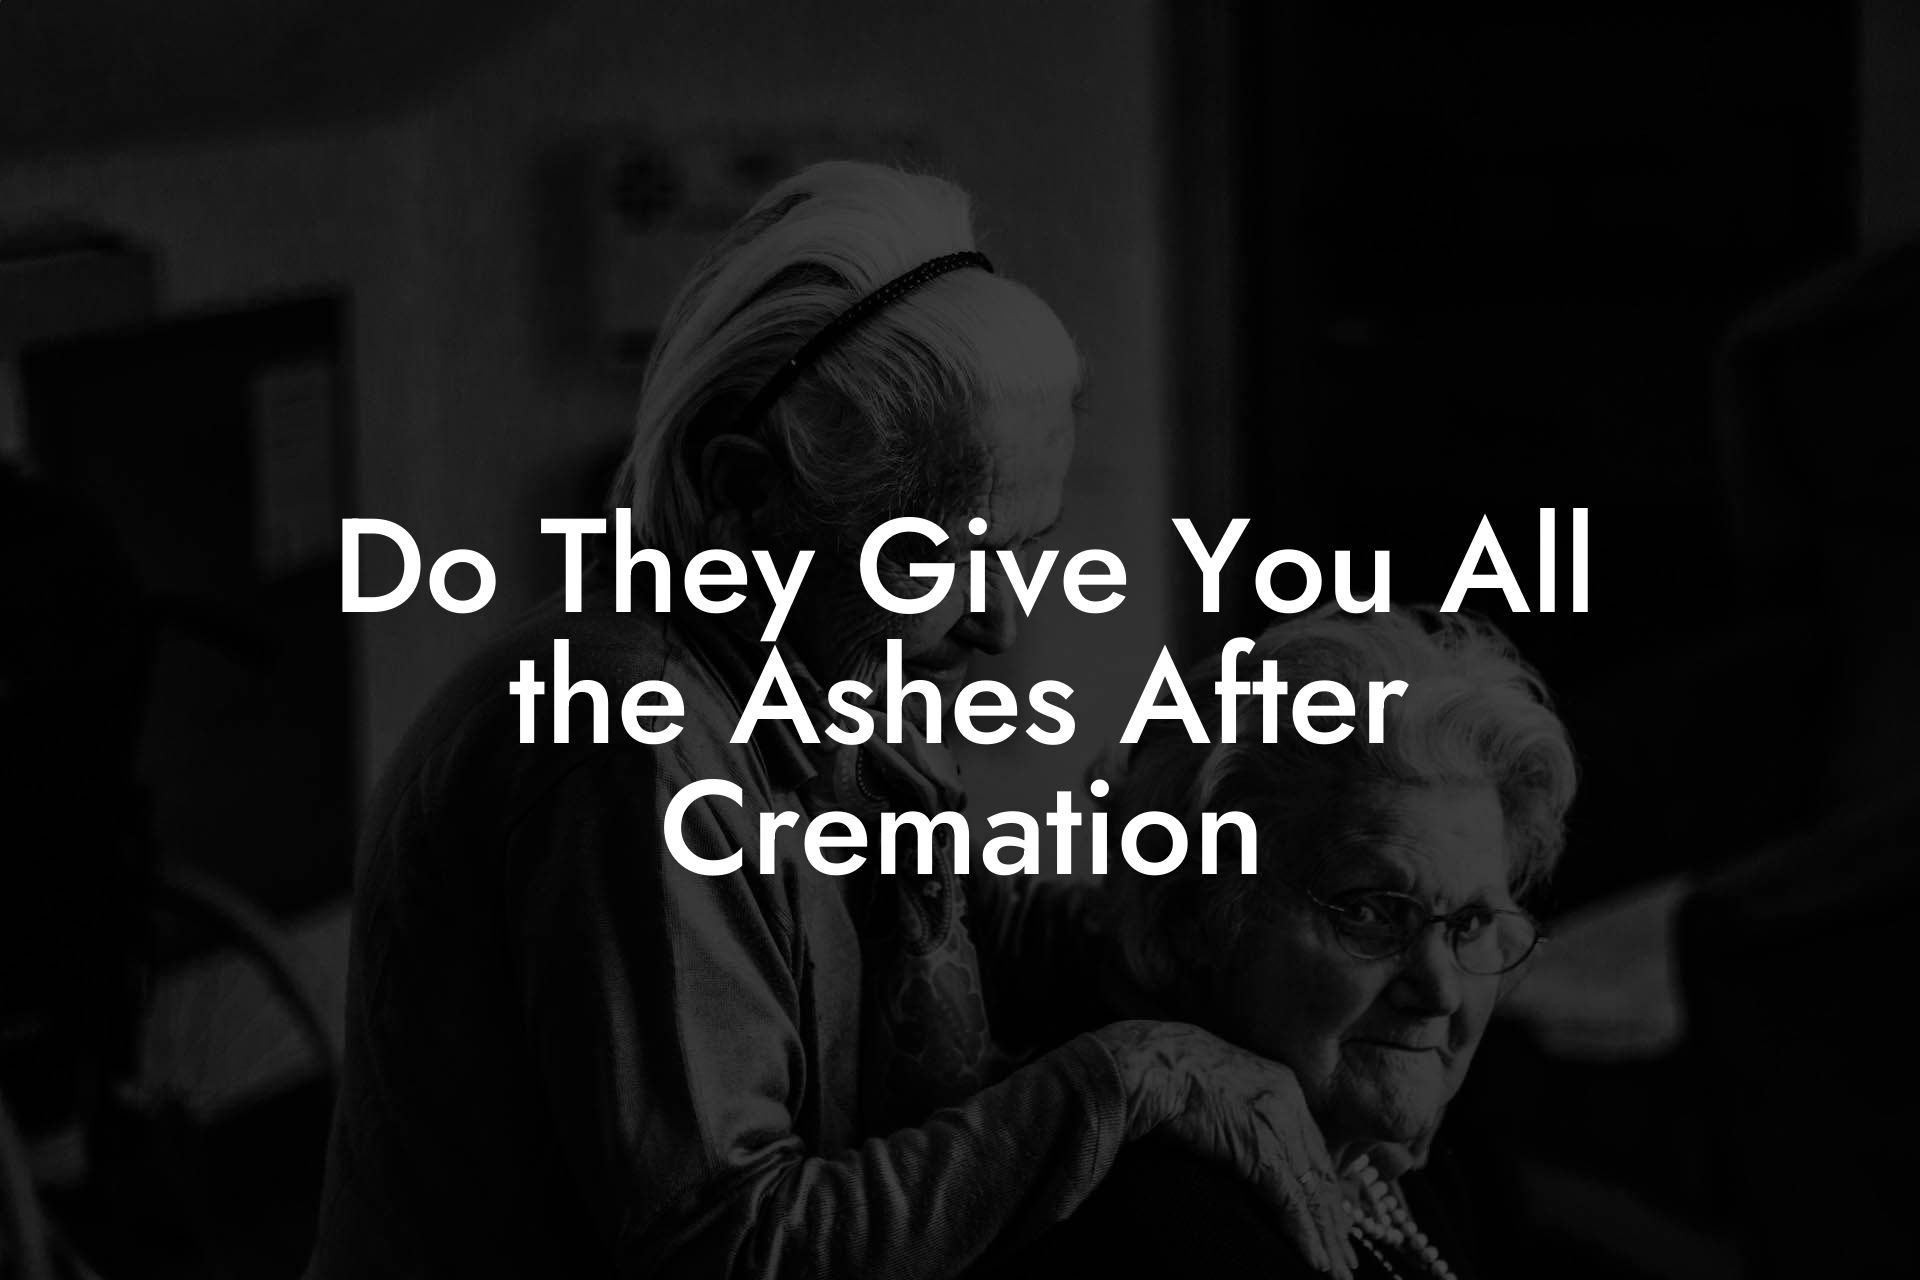 Do They Give You All the Ashes After Cremation